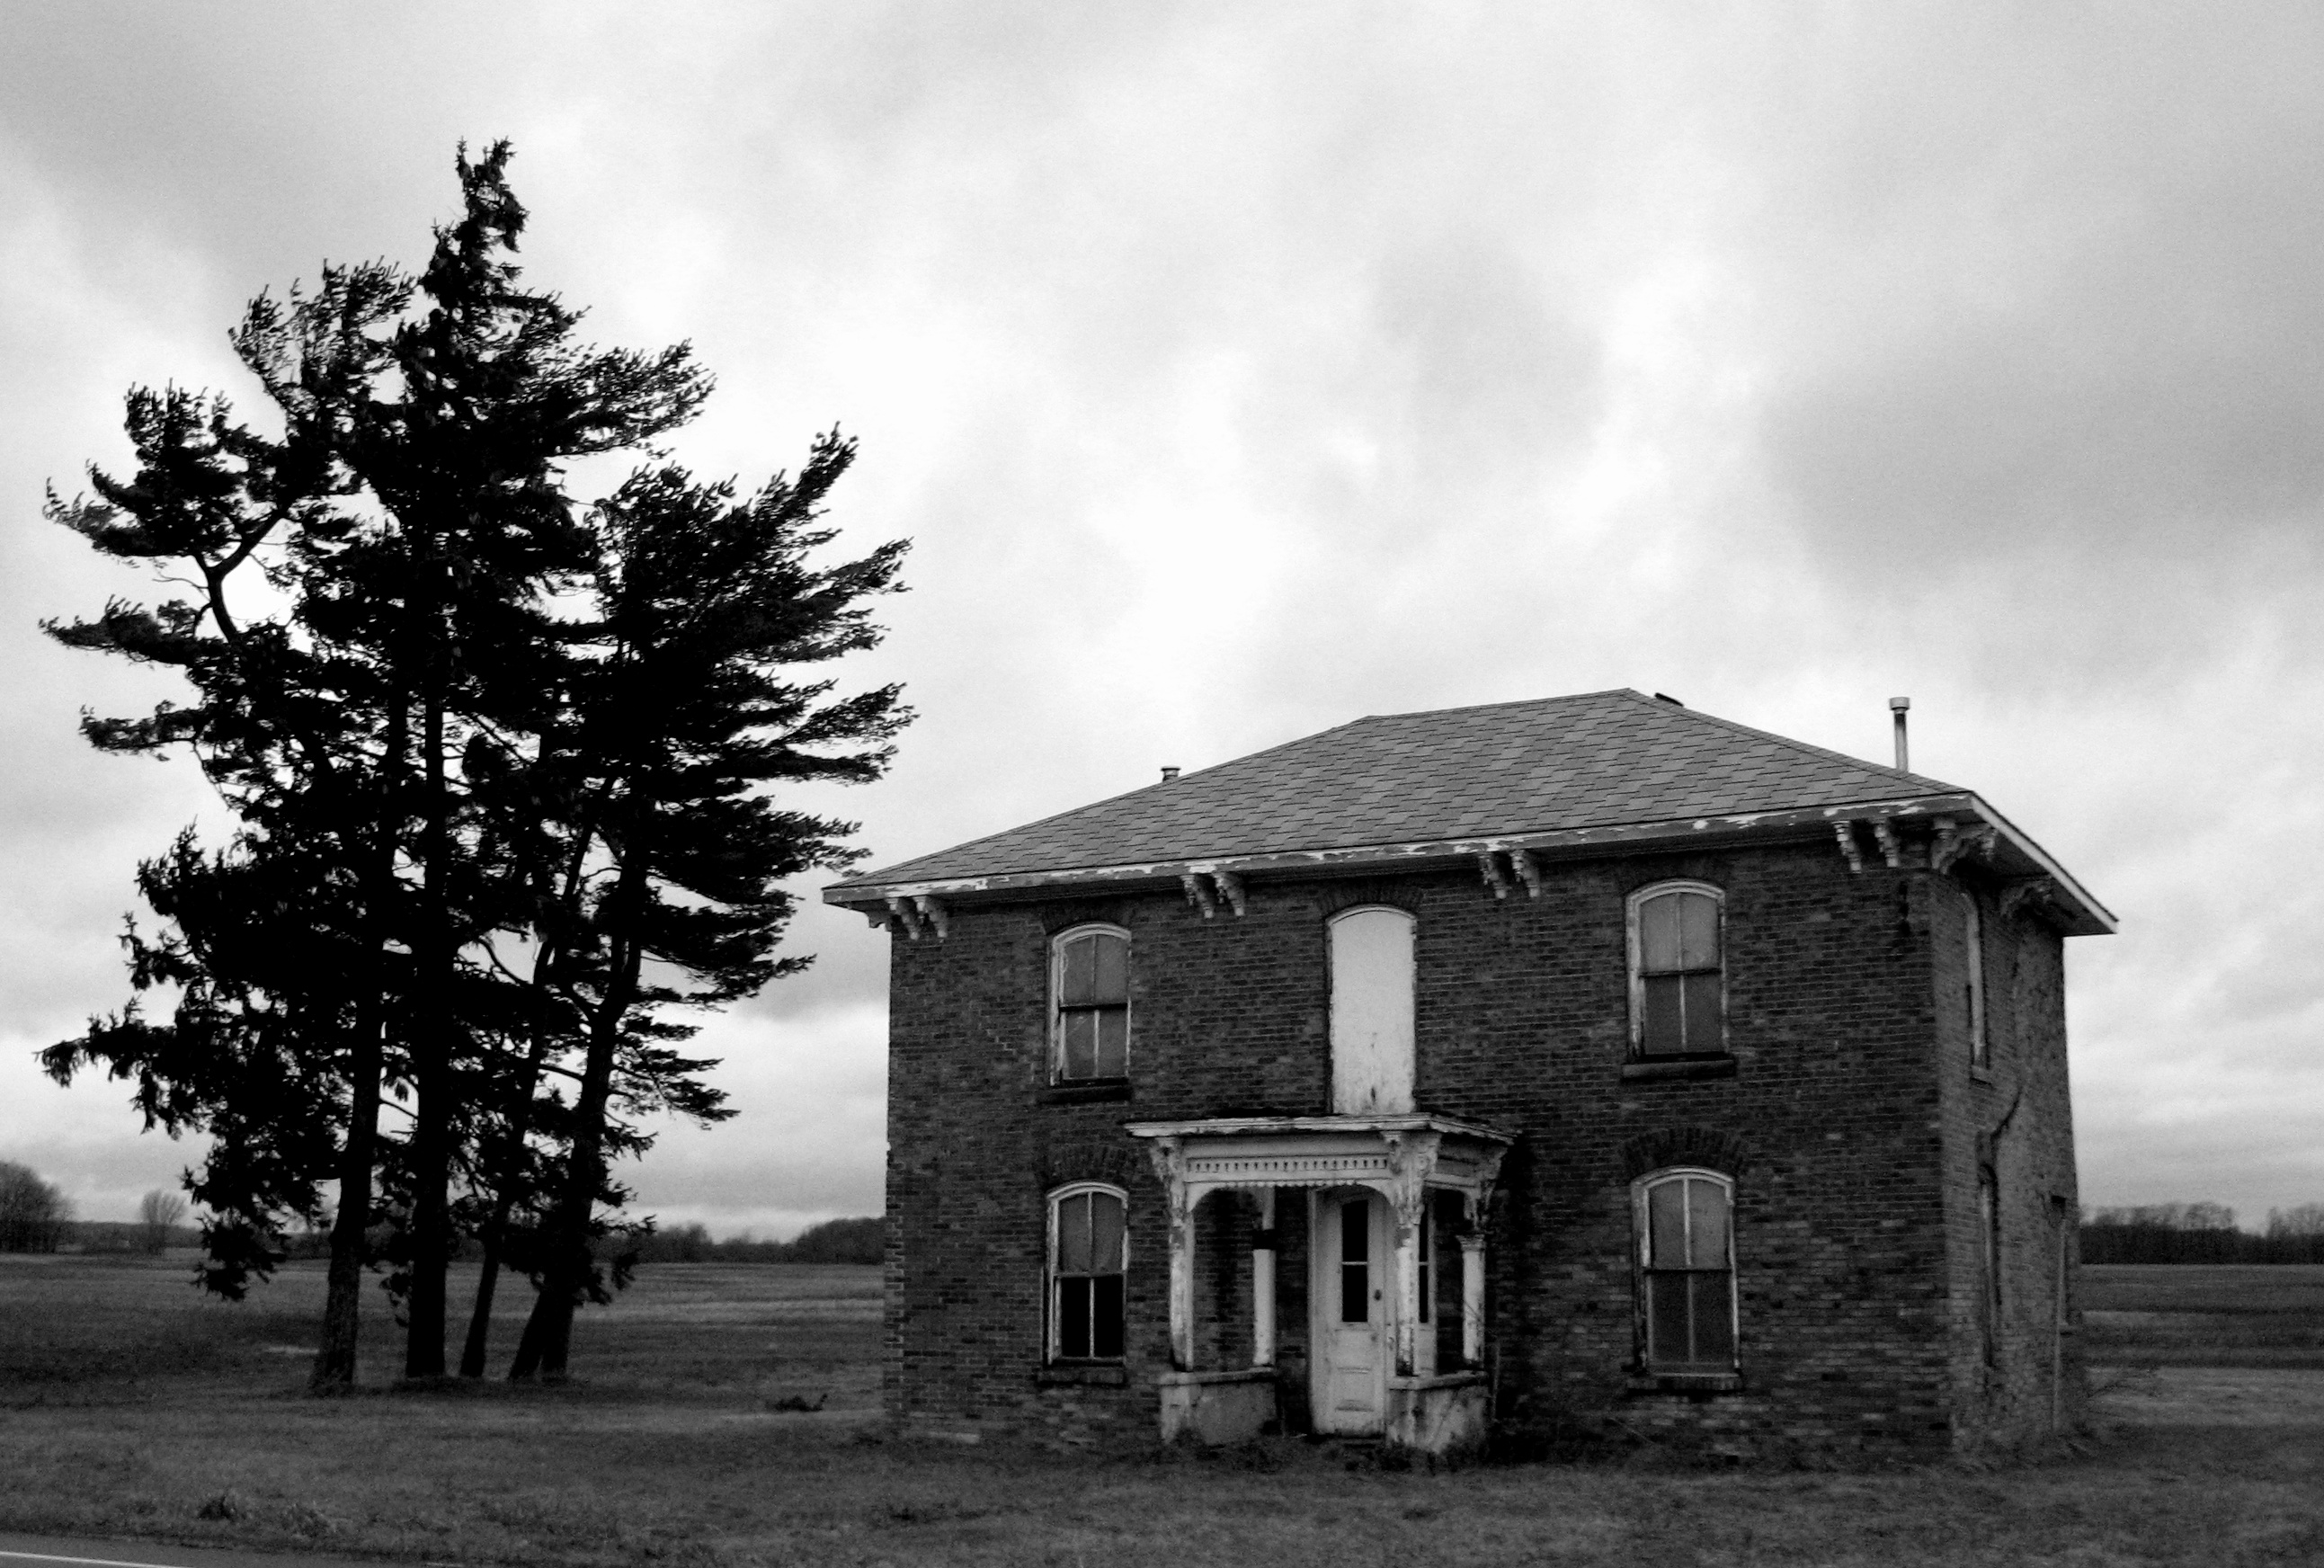 Photoseries Two: Abandoned Houses in Ontario, Canada – Exploration ...